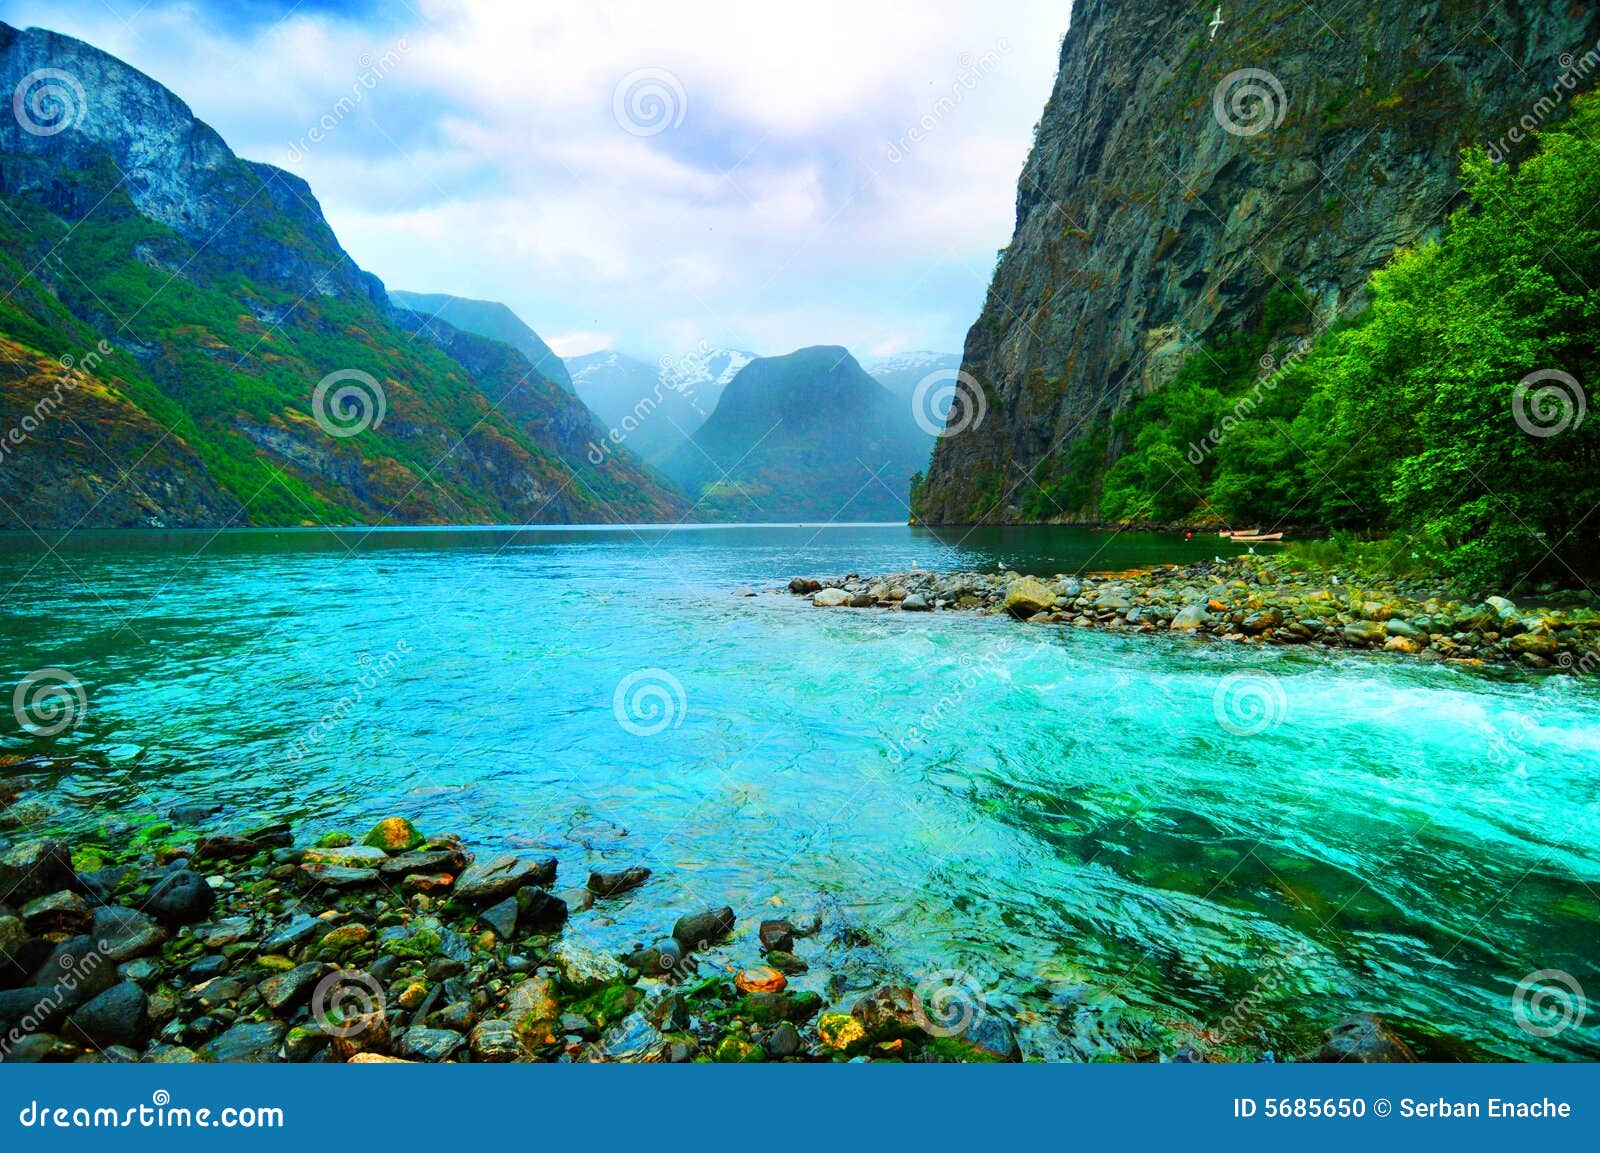 fjord and river, norway